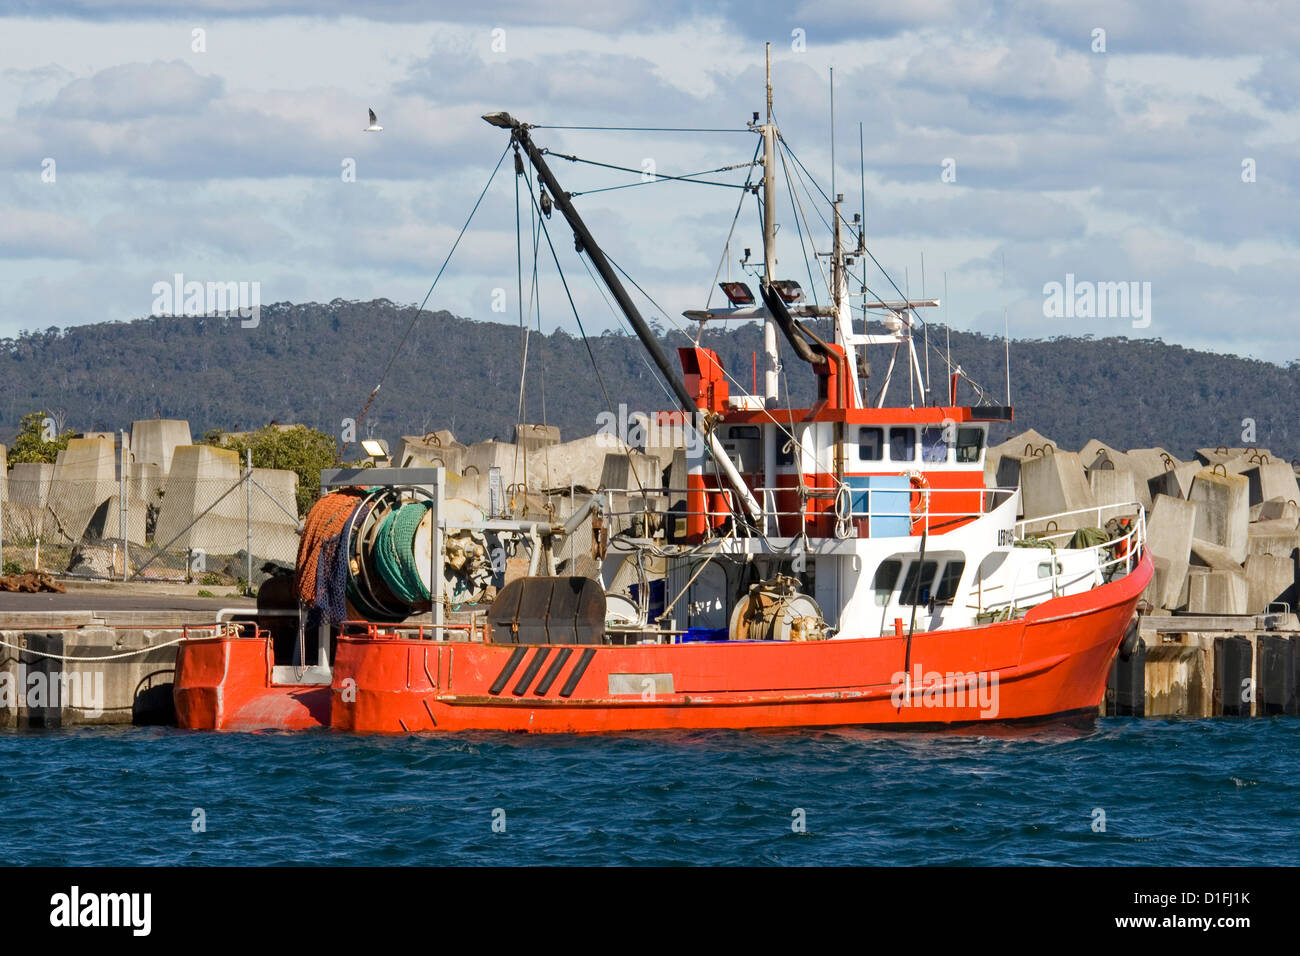 Red fishing boat / trawler moored at wharf at Eden, NSW Australia Stock Photo